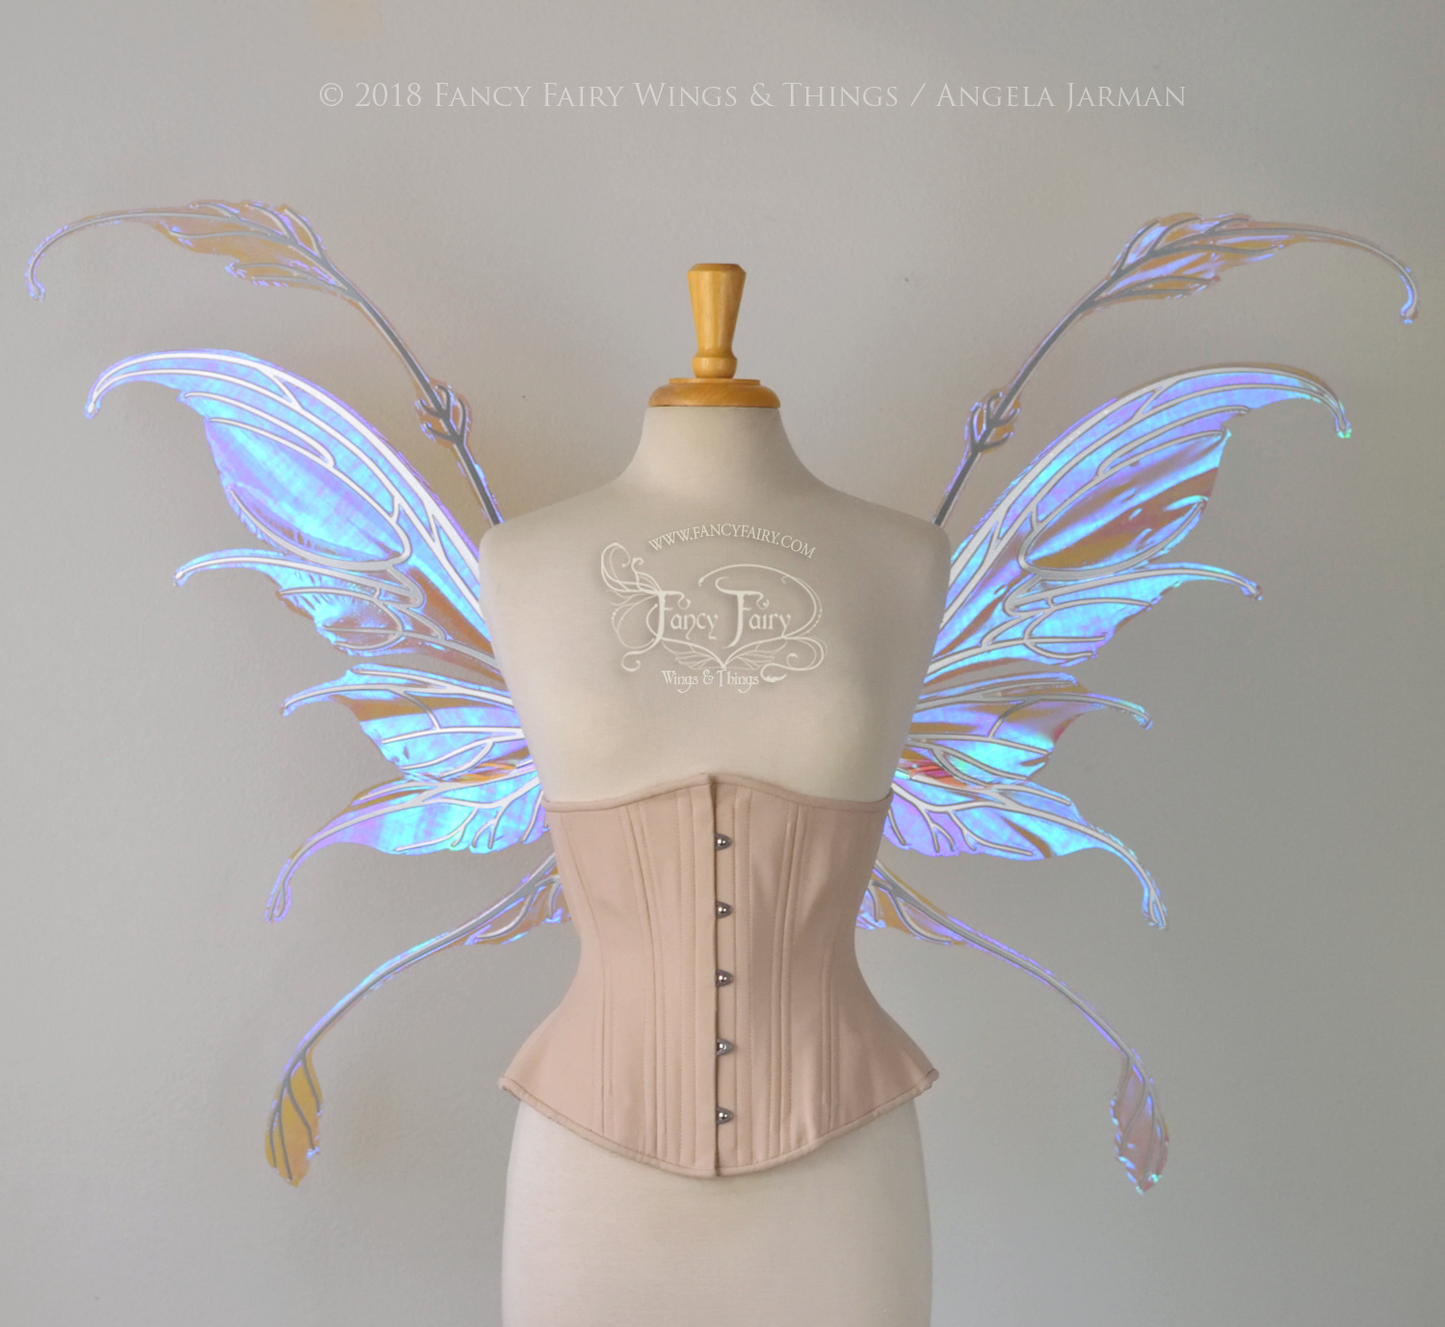 Fauna Iridescent Convertible Fairy Wings in Lilac with Silver Chrome veins